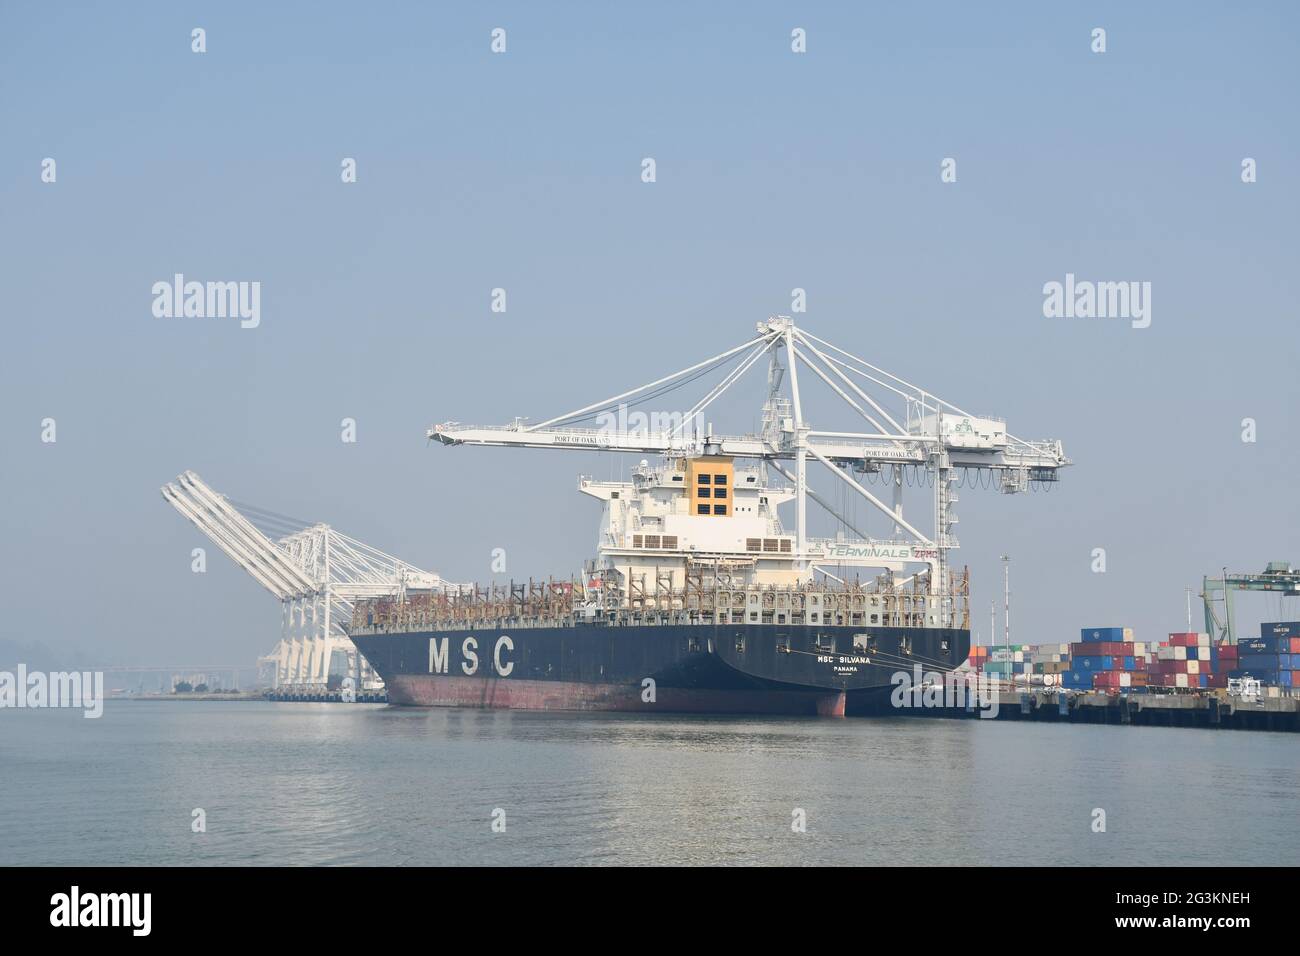 Container ships being loaded at Port of Oakland, California. Sky is obscured because of smoke from forest fires. Stock Photo